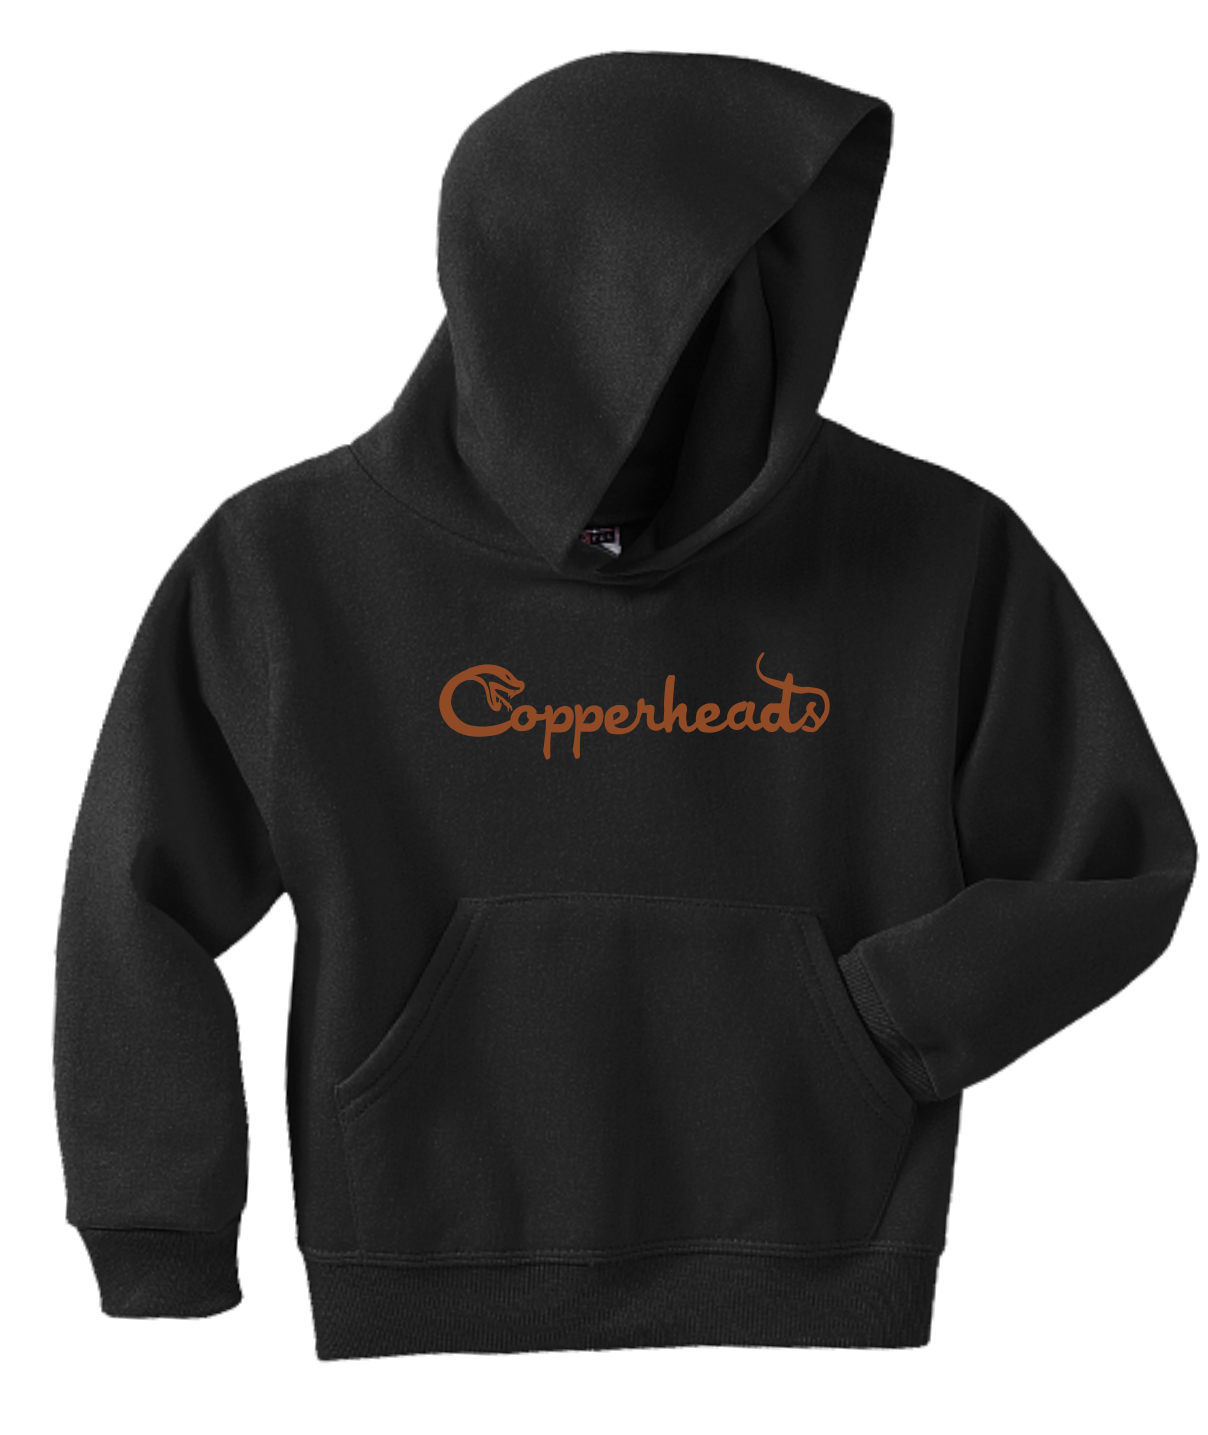 Copperheads Youth Hoodie